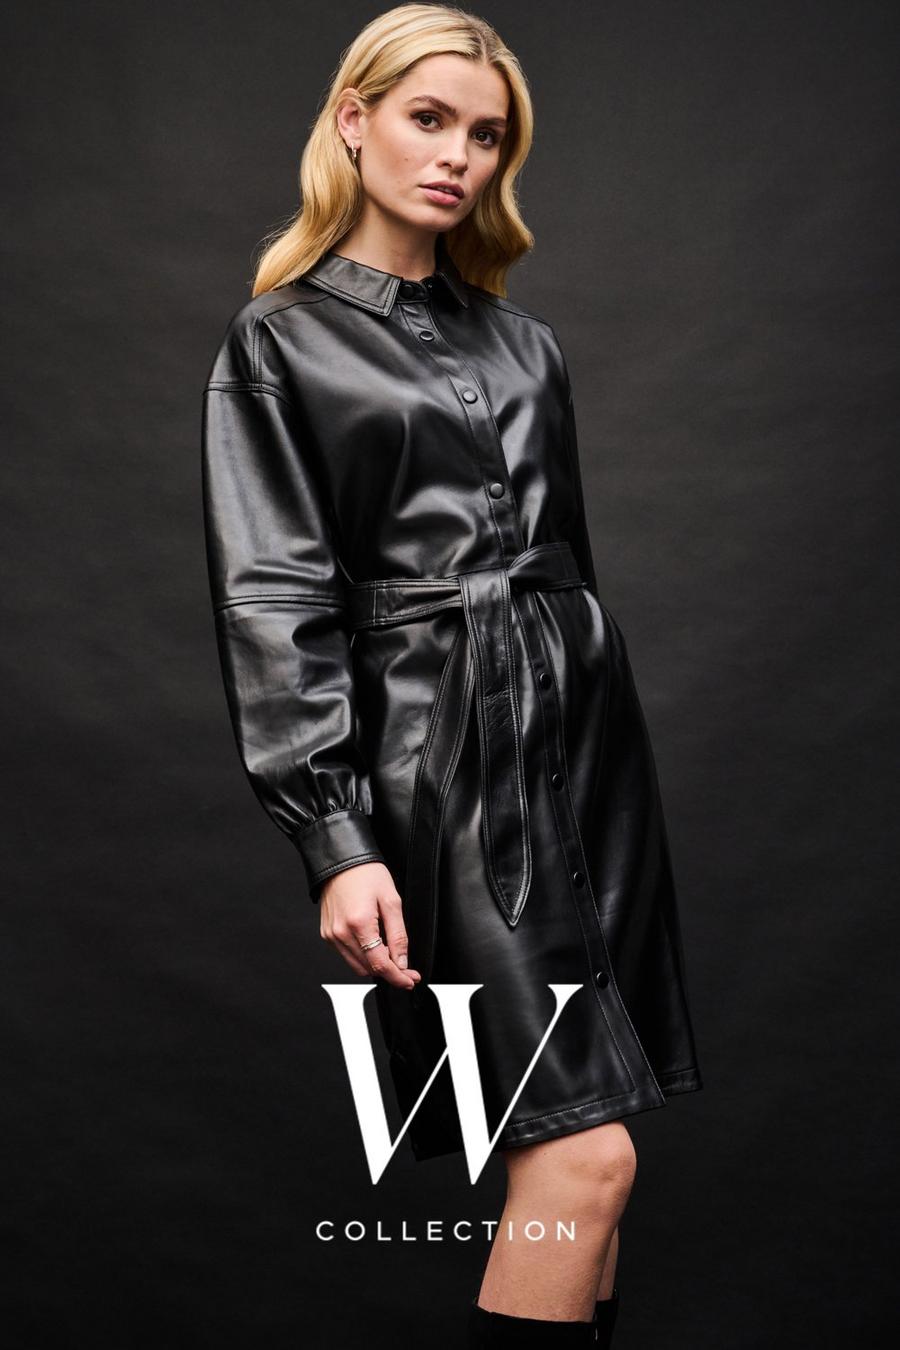 Belted Leather Shirt Dress